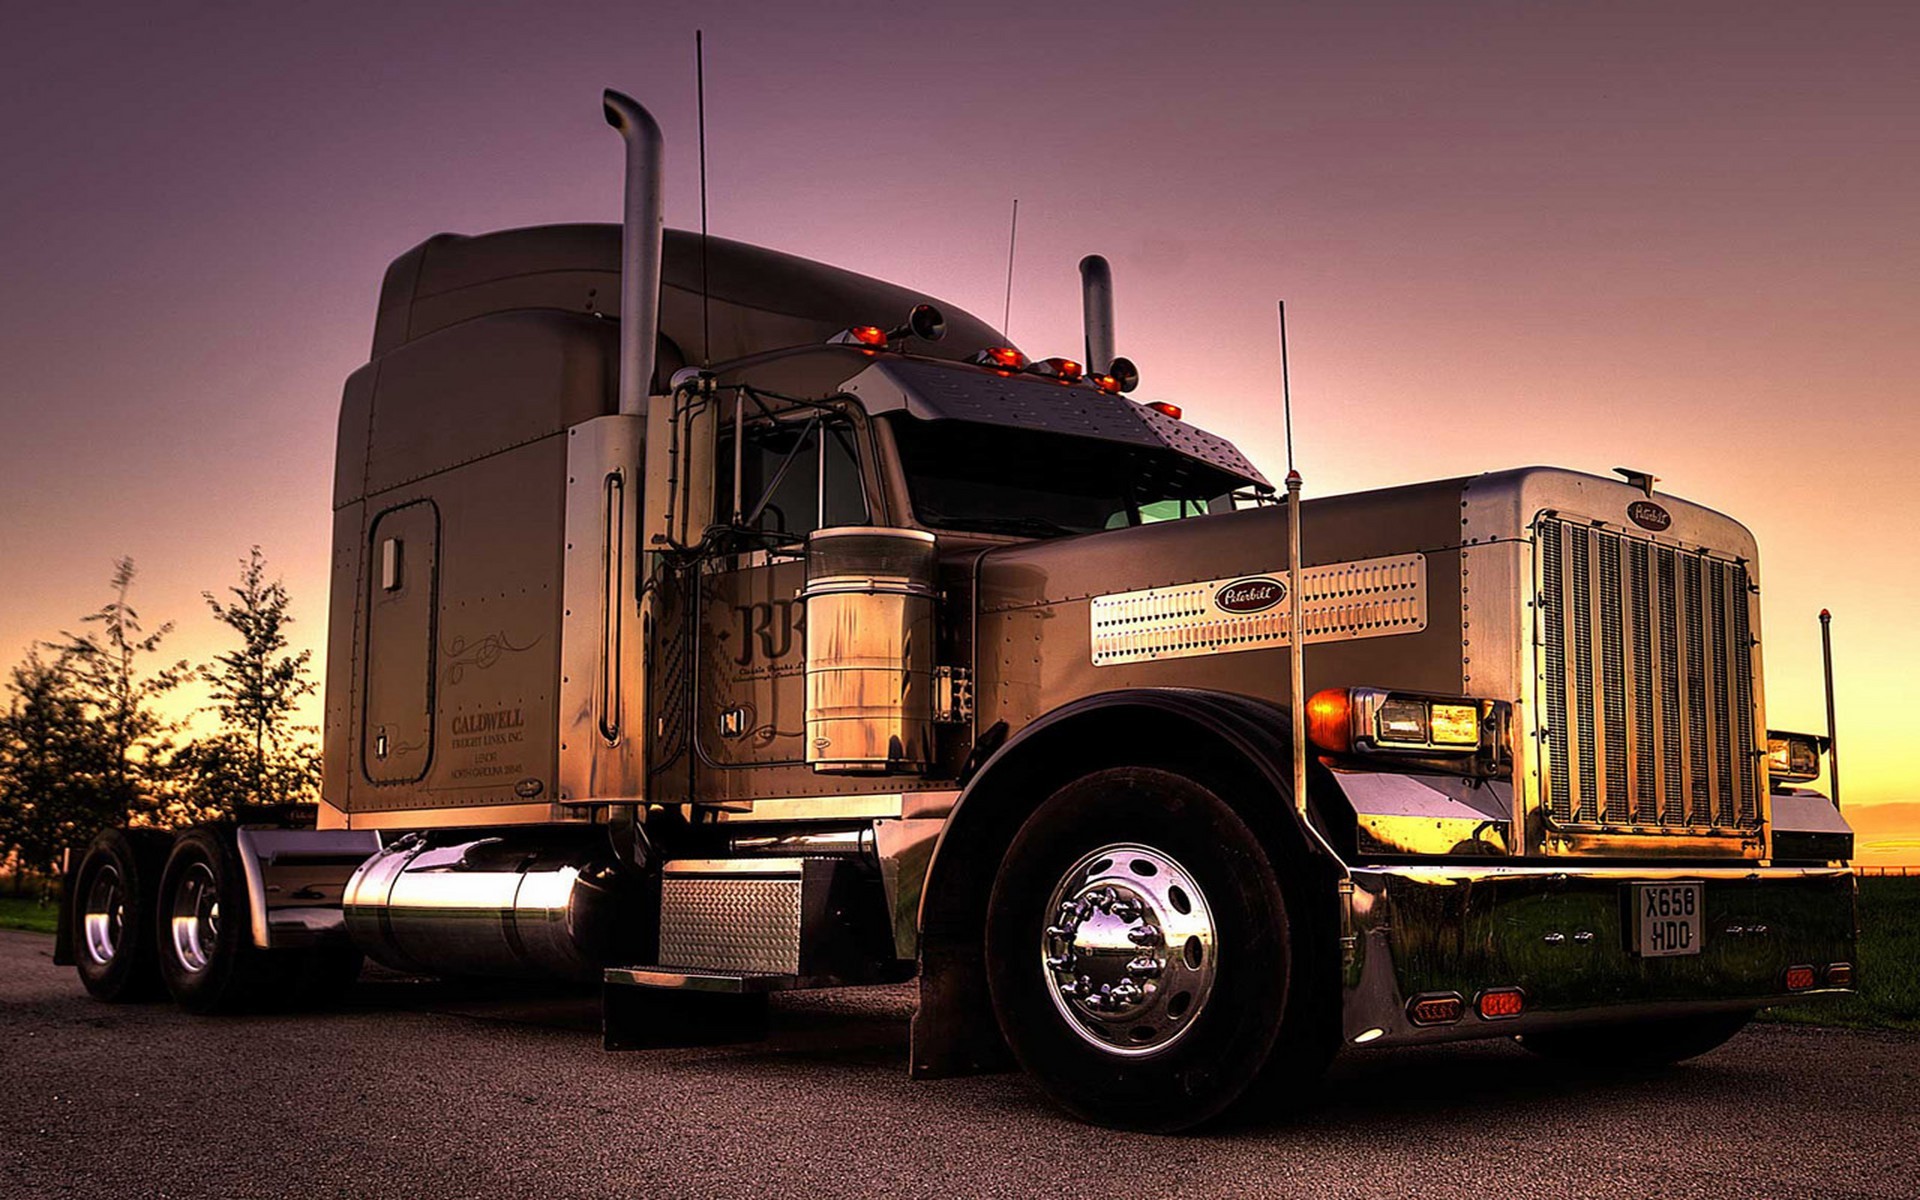 Big Rig Wallpaper Big Rig Hdr By Chris Eley On 500px Exactwall